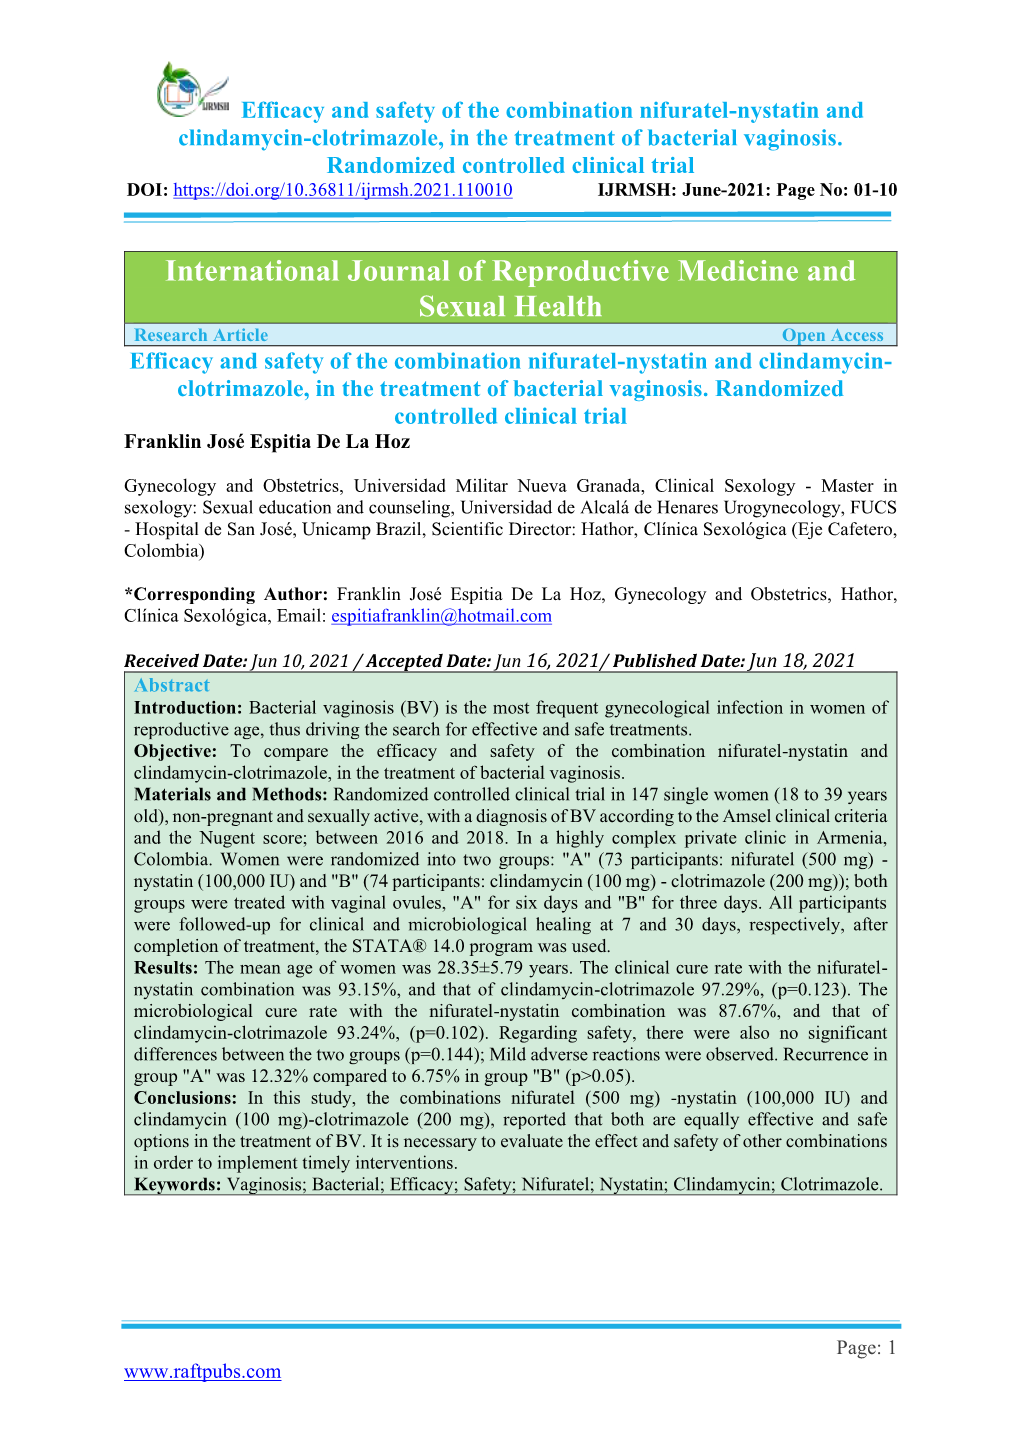 International Journal of Reproductive Medicine and Sexual Health